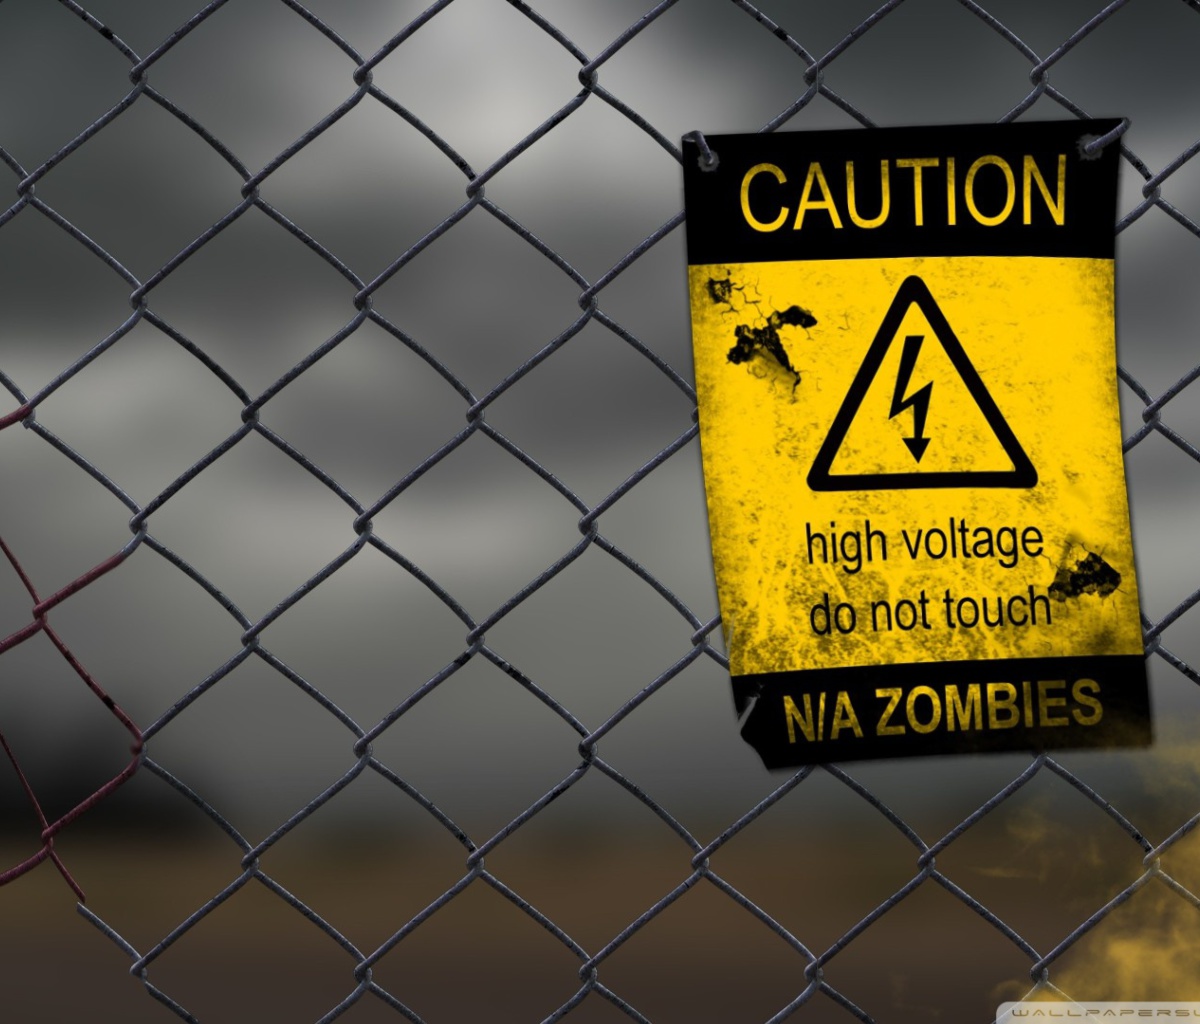 Caution Zombies, High voltage do not touch wallpaper 1200x1024